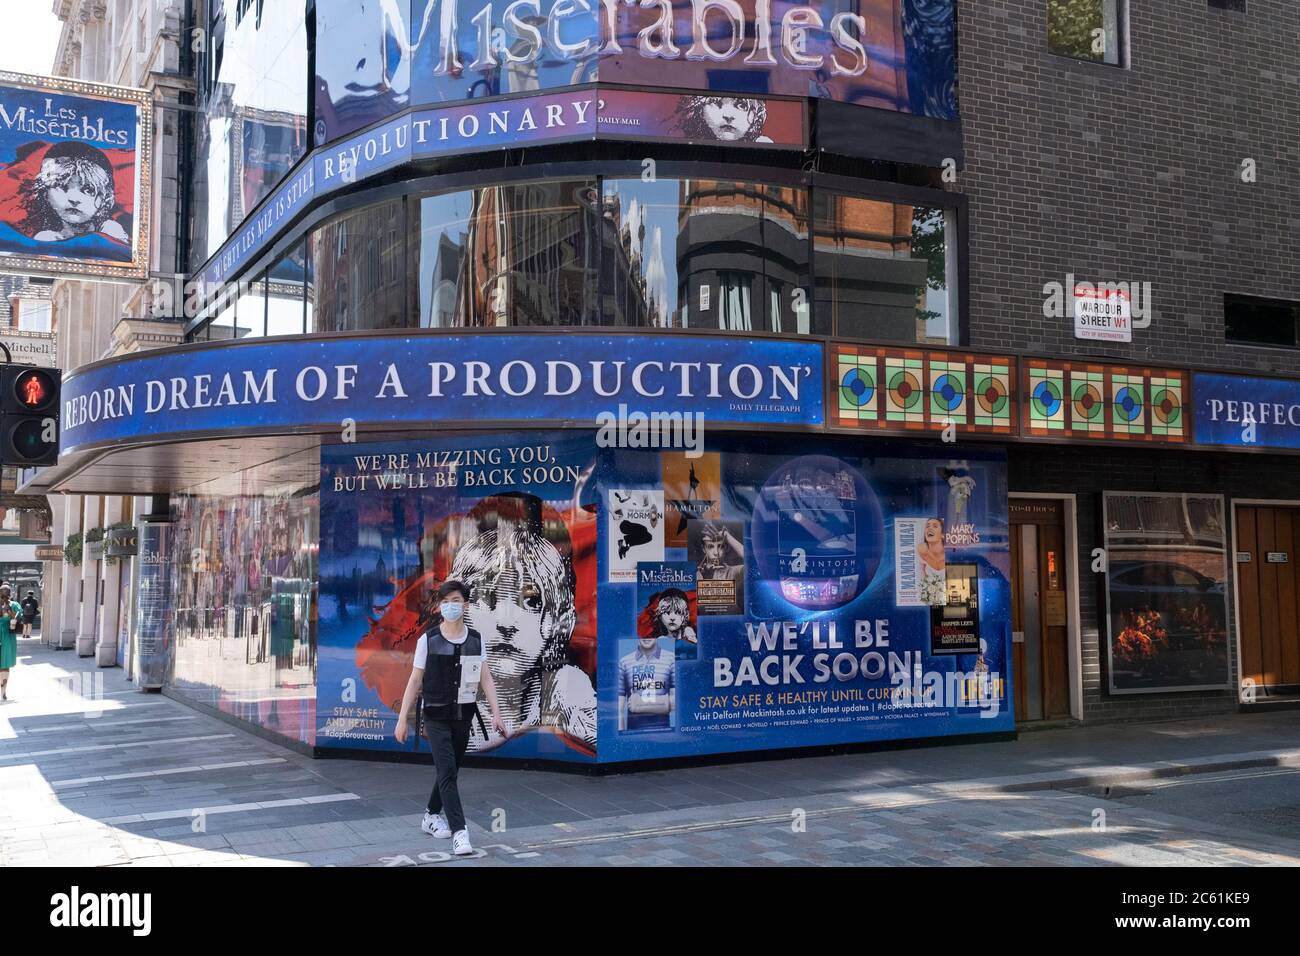 West End Theatres Ramain Closed With Musicals And Other Theatre Shows Like The Incredibly Popular Les Miserables At The Sondheim Theatre On Hold Under Coronavirus Lockdown On 26th June 2020 In London